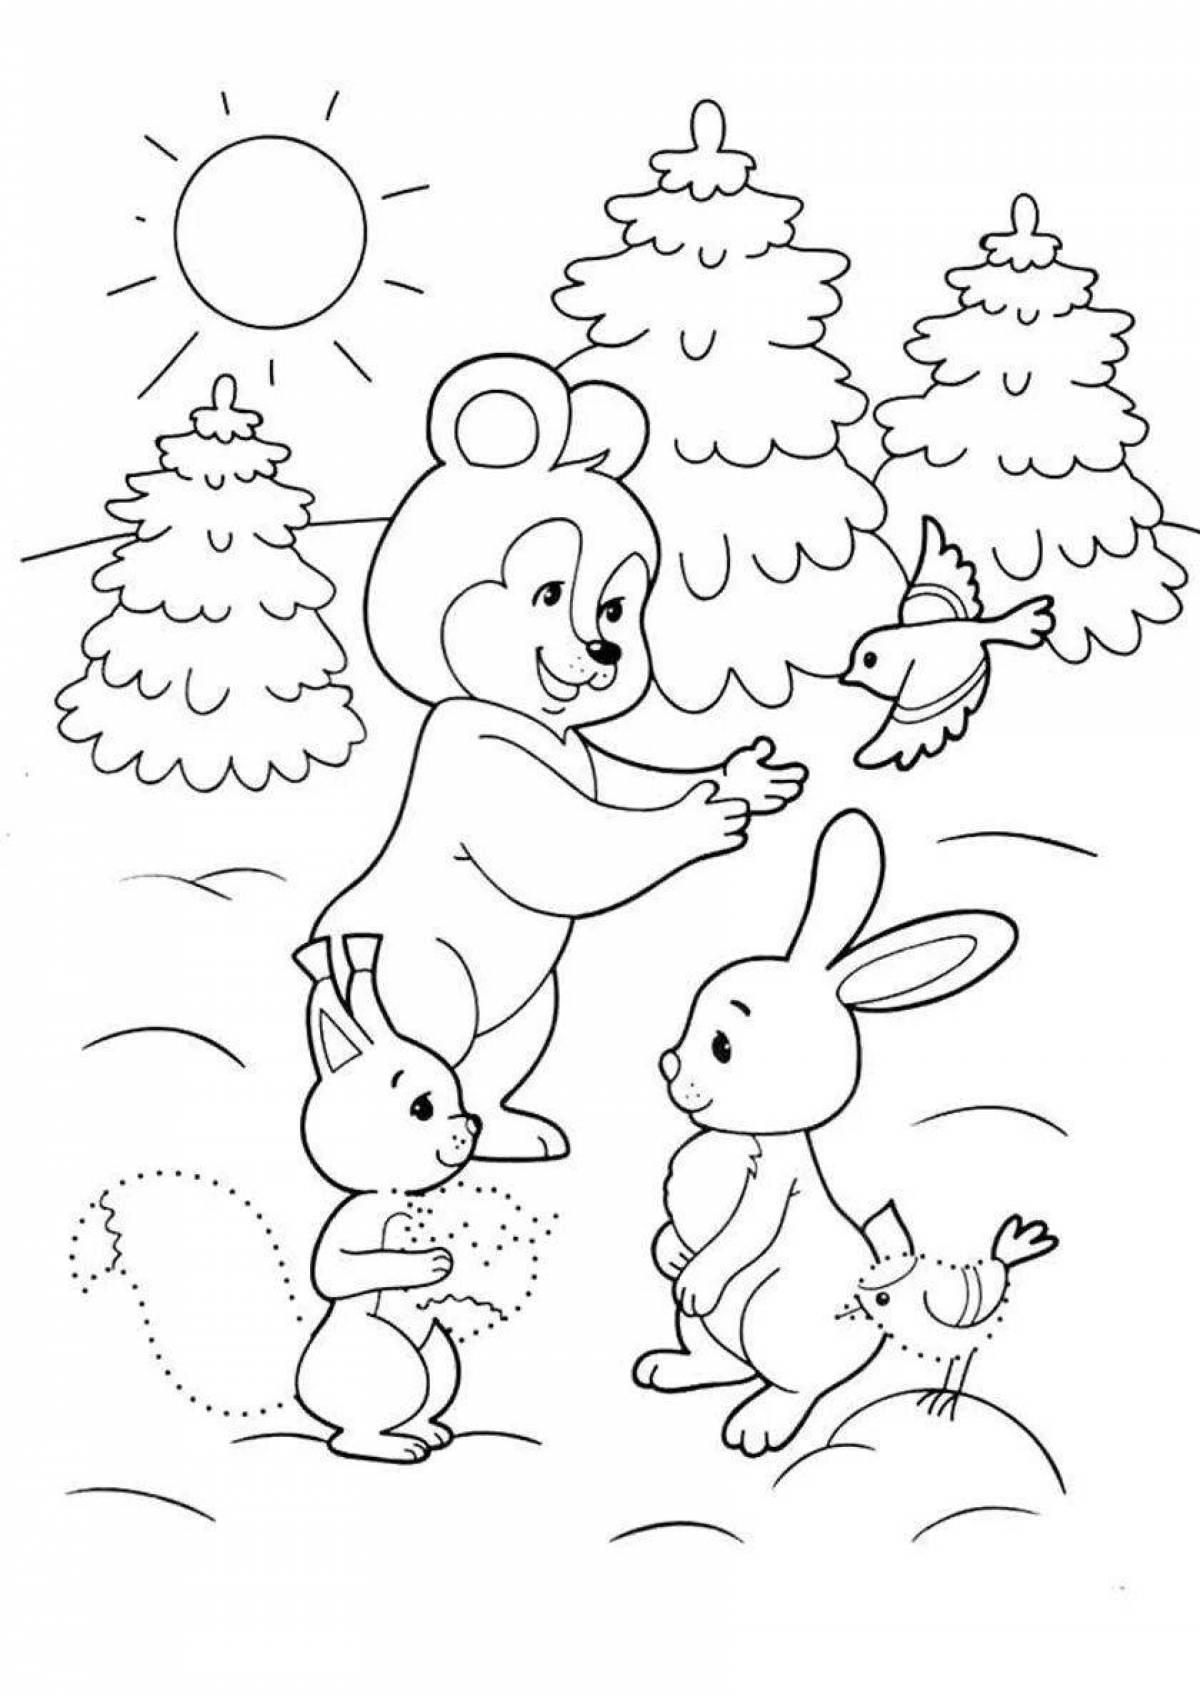 Bright winter coloring pages with animals for kids